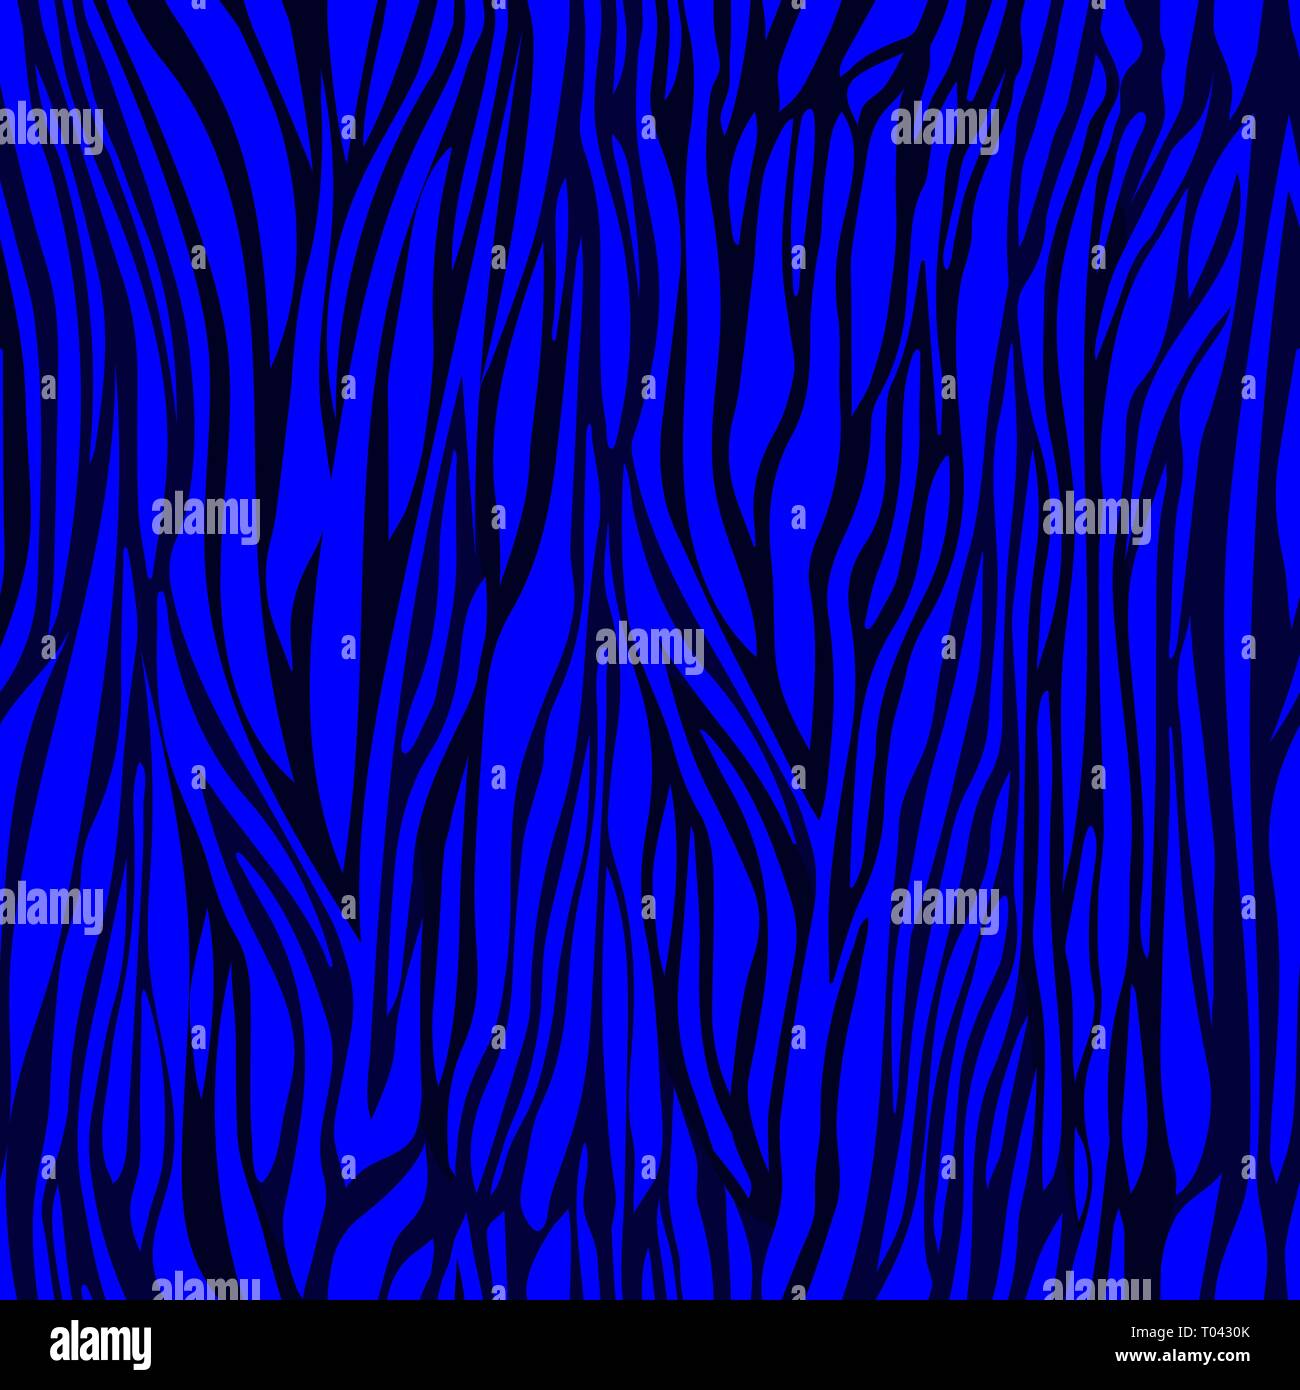 Zebra skin seamless pattern, animal texture, animalistic ornament, abstract waves tracery, vector background. Chaotic black blue stripes on indigo bac Stock Vector